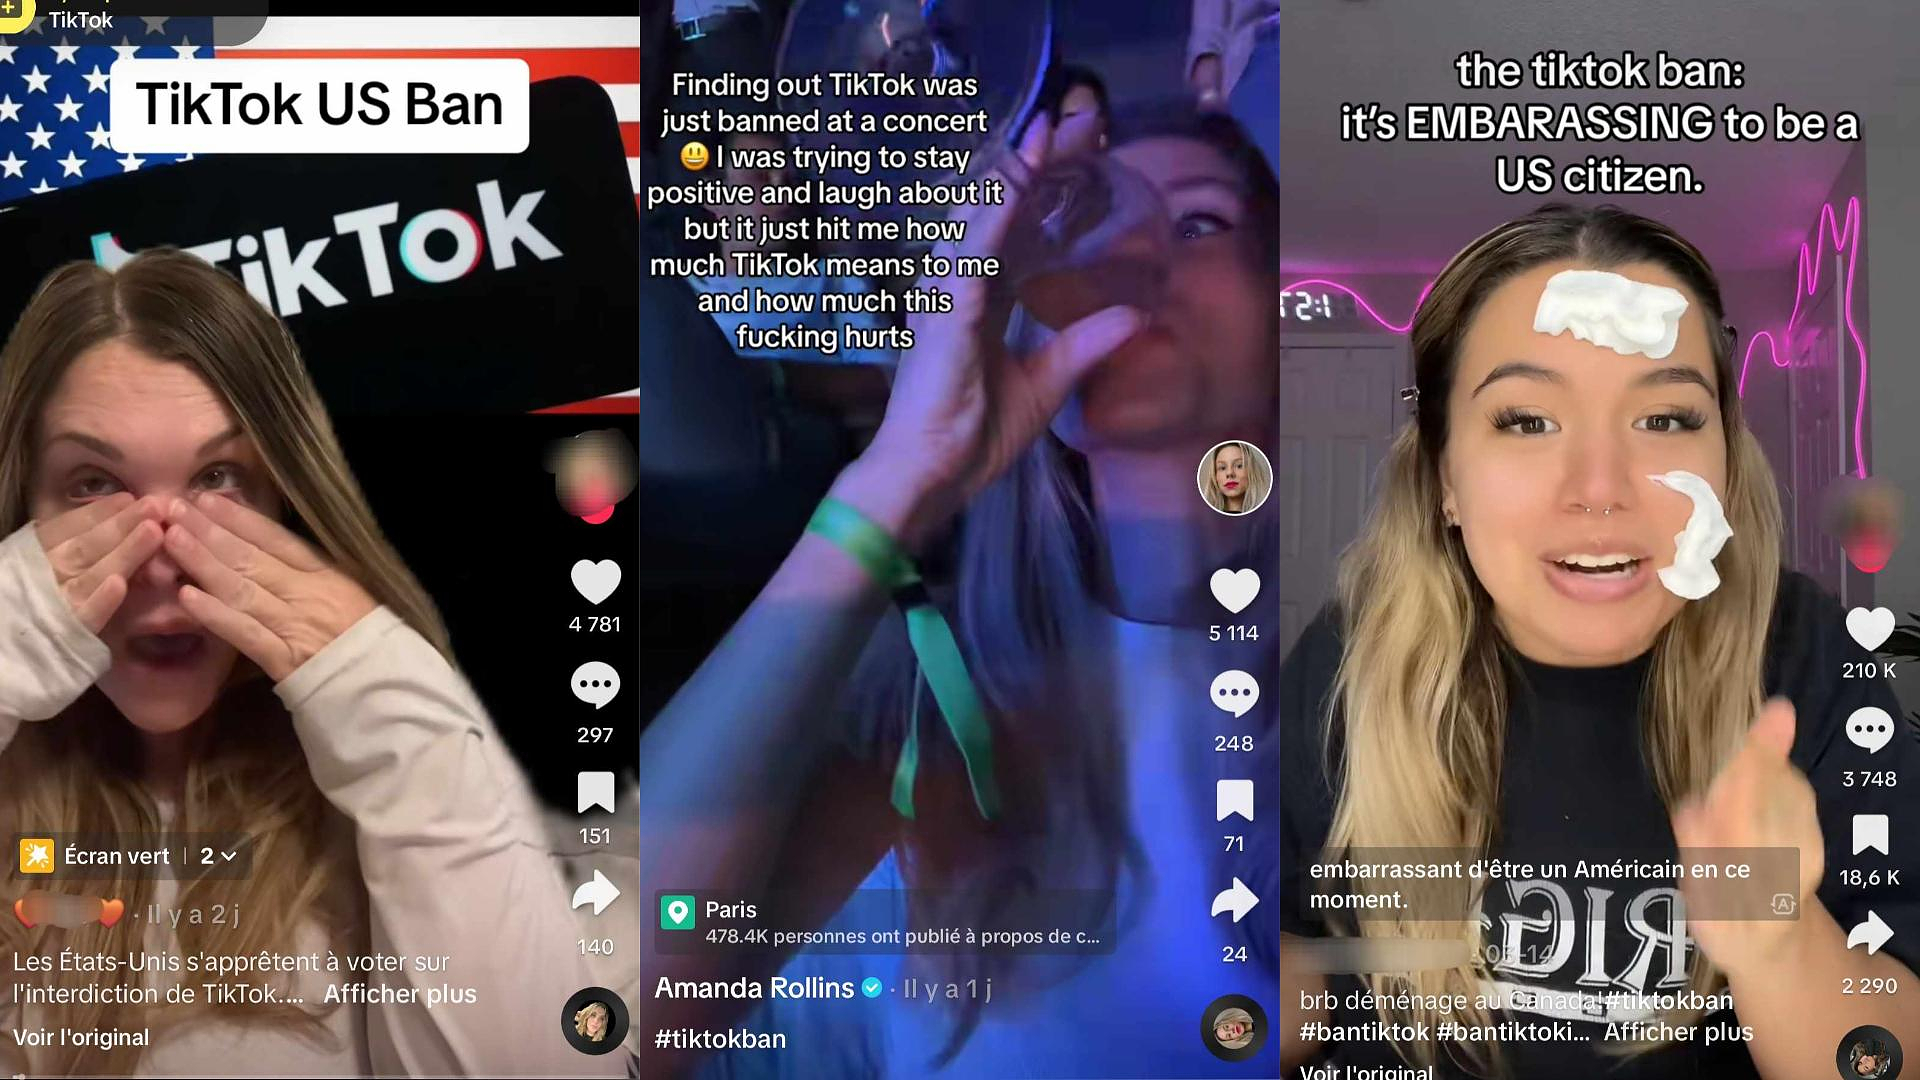 “I could lose up to 5,000 euros per month”: influencers are alarmed by a possible ban on TikTok in the United States